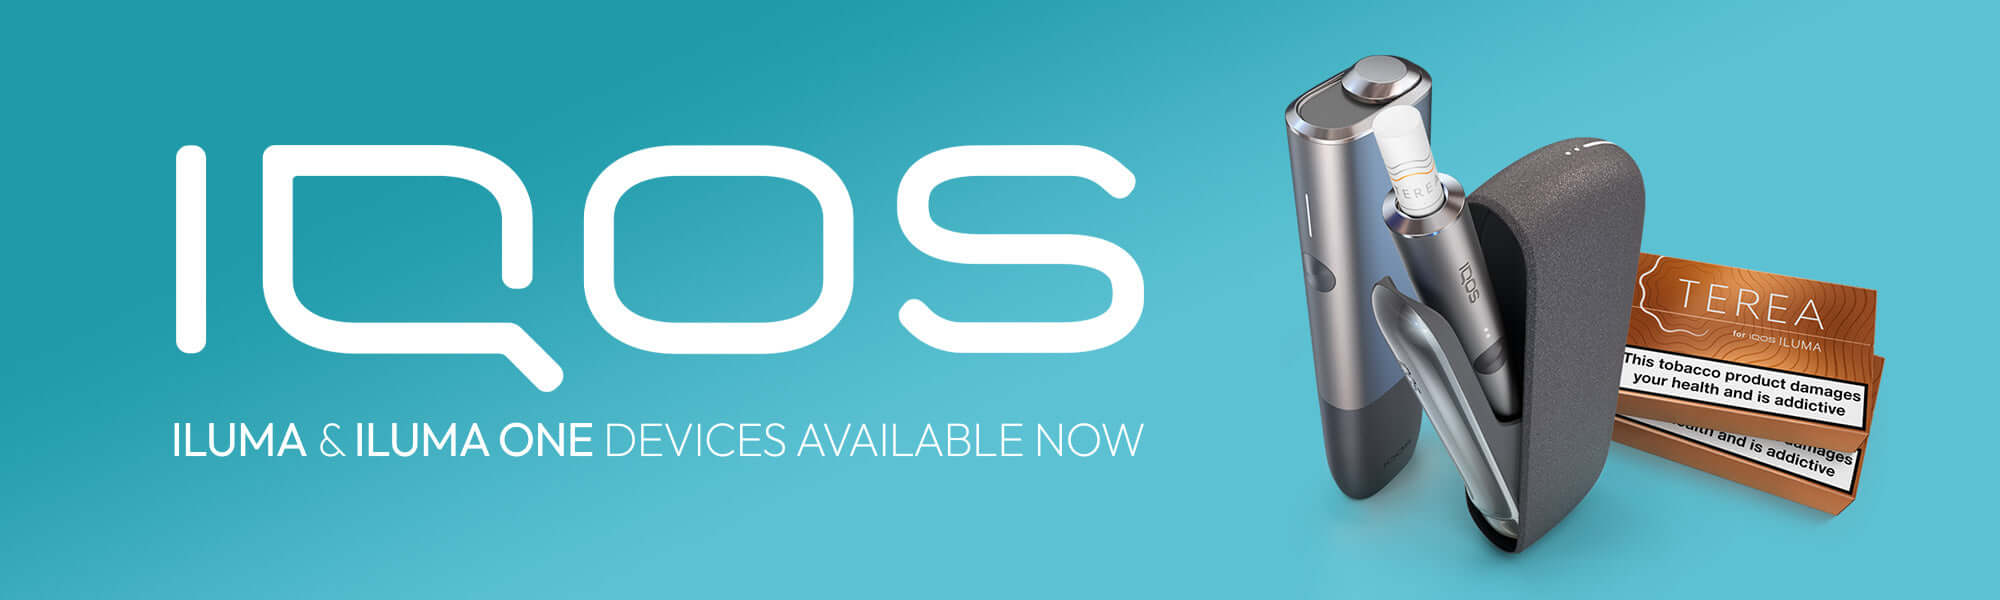 IQOS Iluma Device in Black with a pack of IQOS TEREA Tobacco Sticks on a turquoise background. IQOS Logo is large and has the official IQOS Iluma device on therre for sale from £39.99 at 888 Vapour. Desktop banner